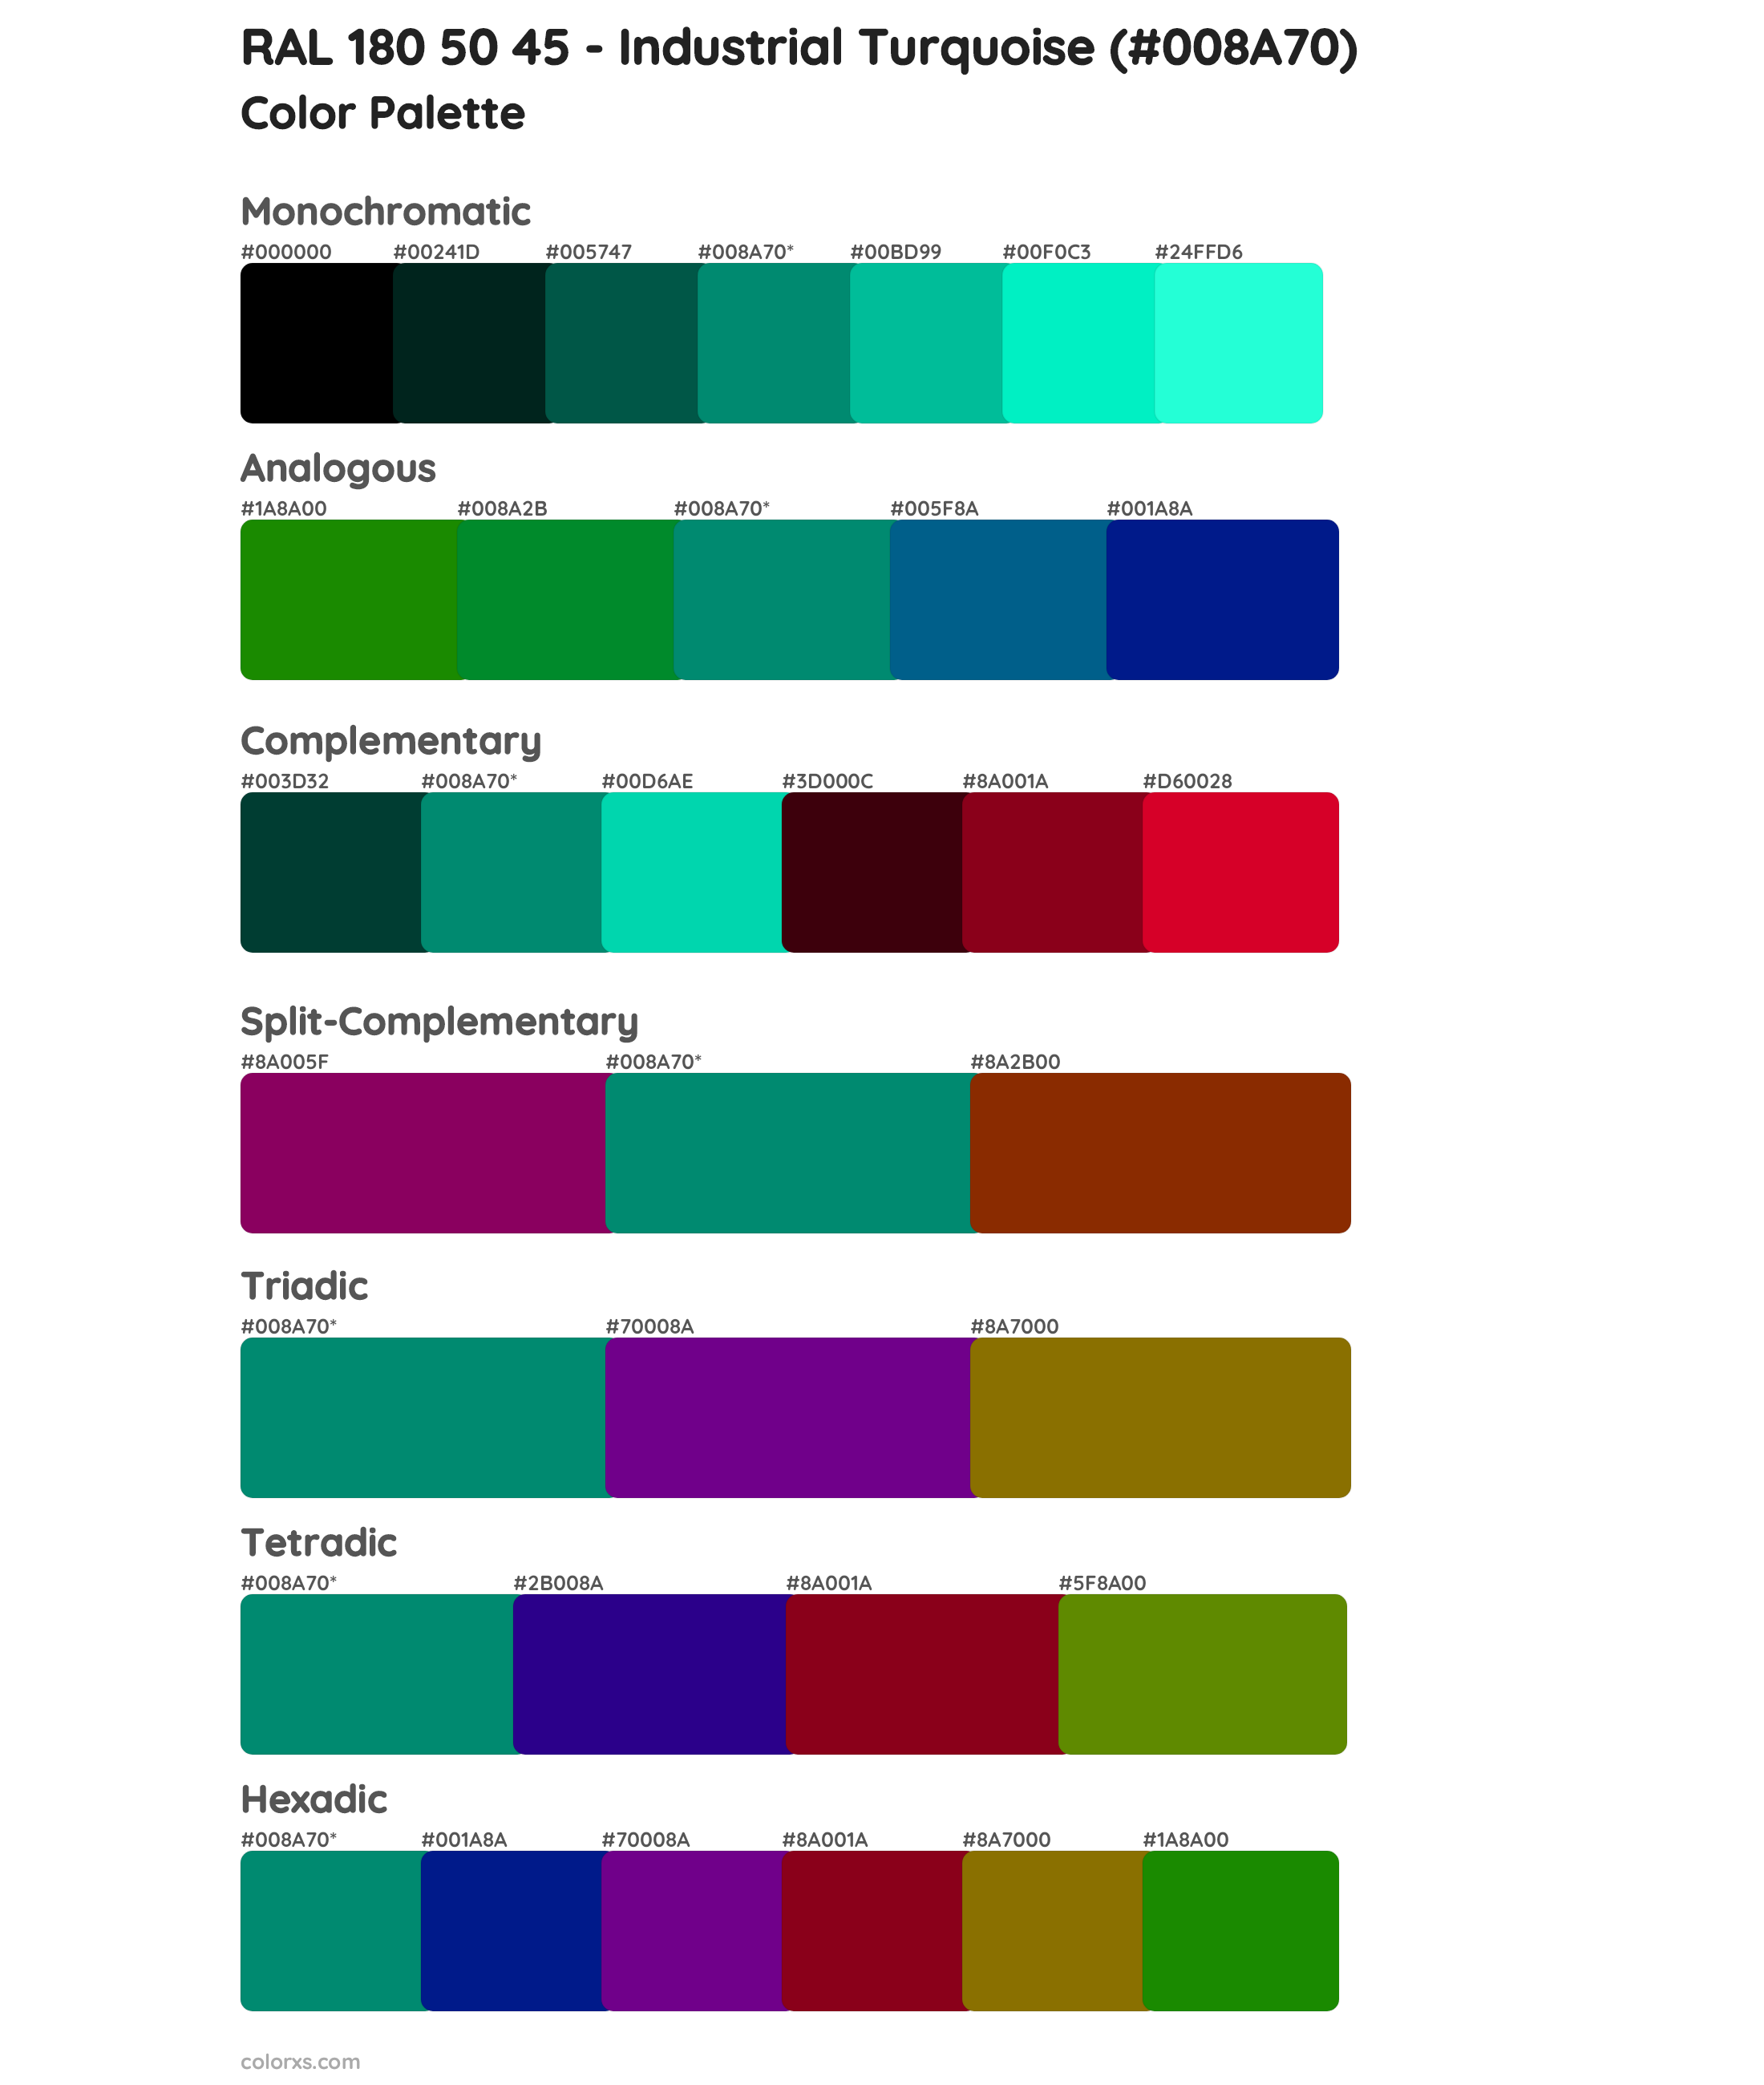 RAL 180 50 45 - Industrial Turquoise Color Scheme Palettes